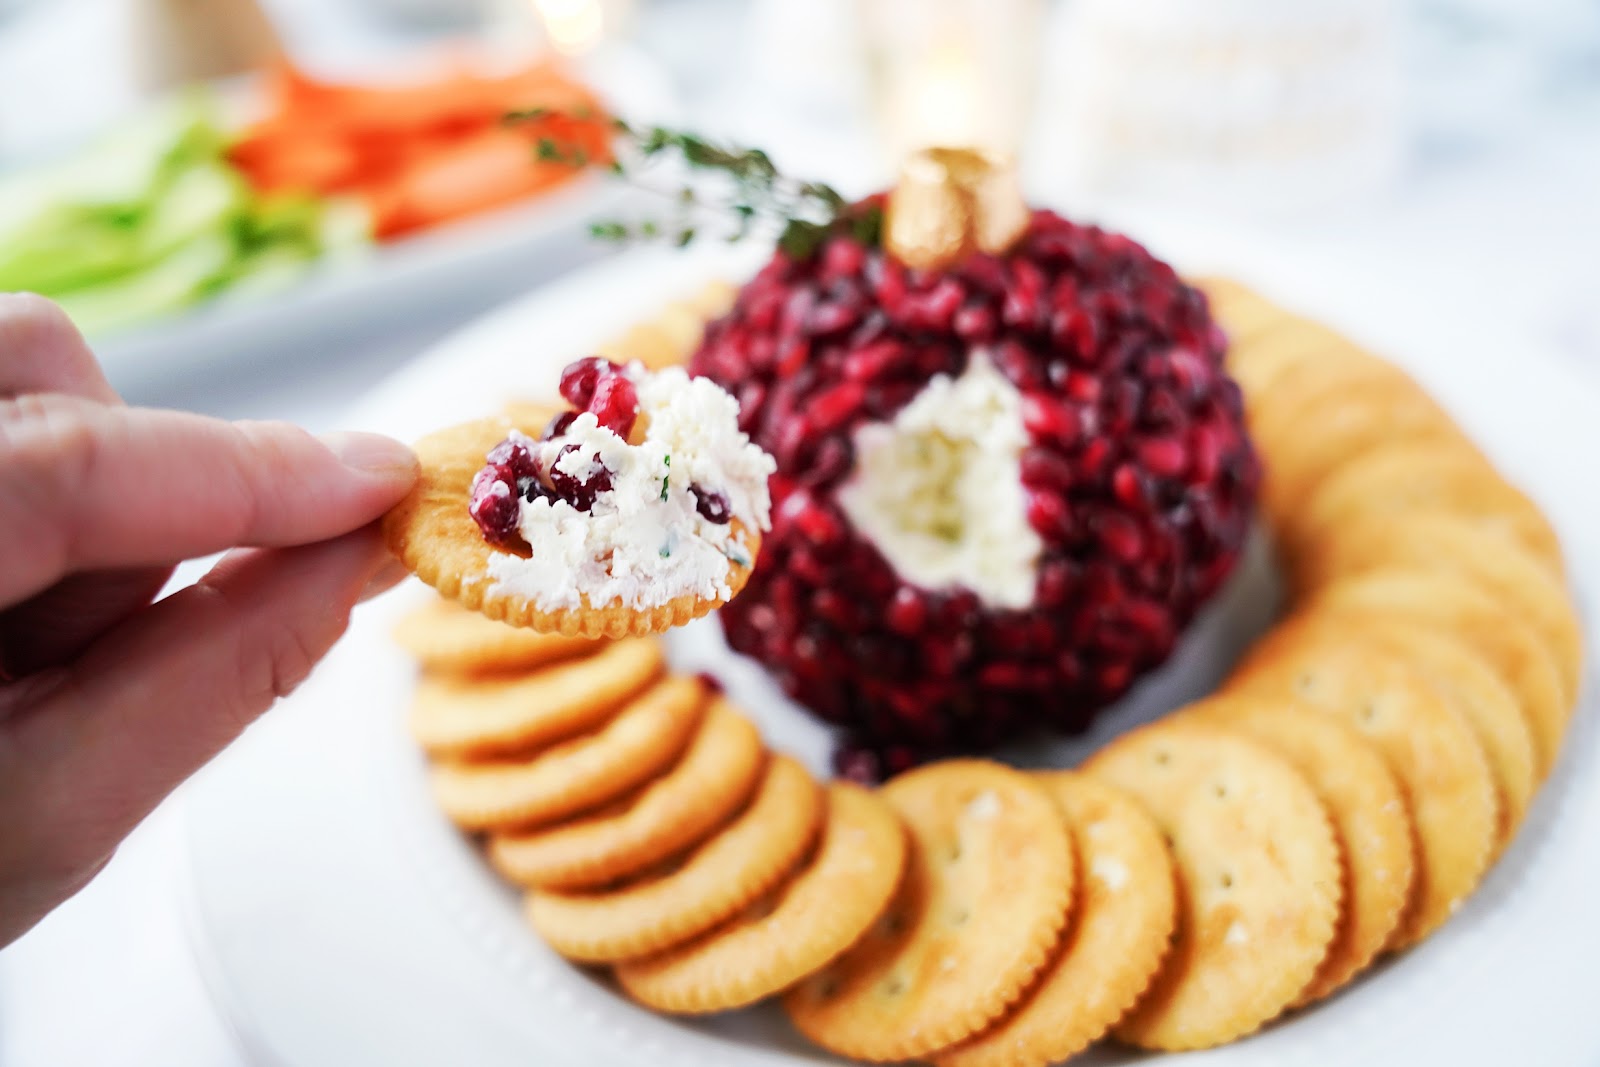 Pomegranate cheese ball on crackers.